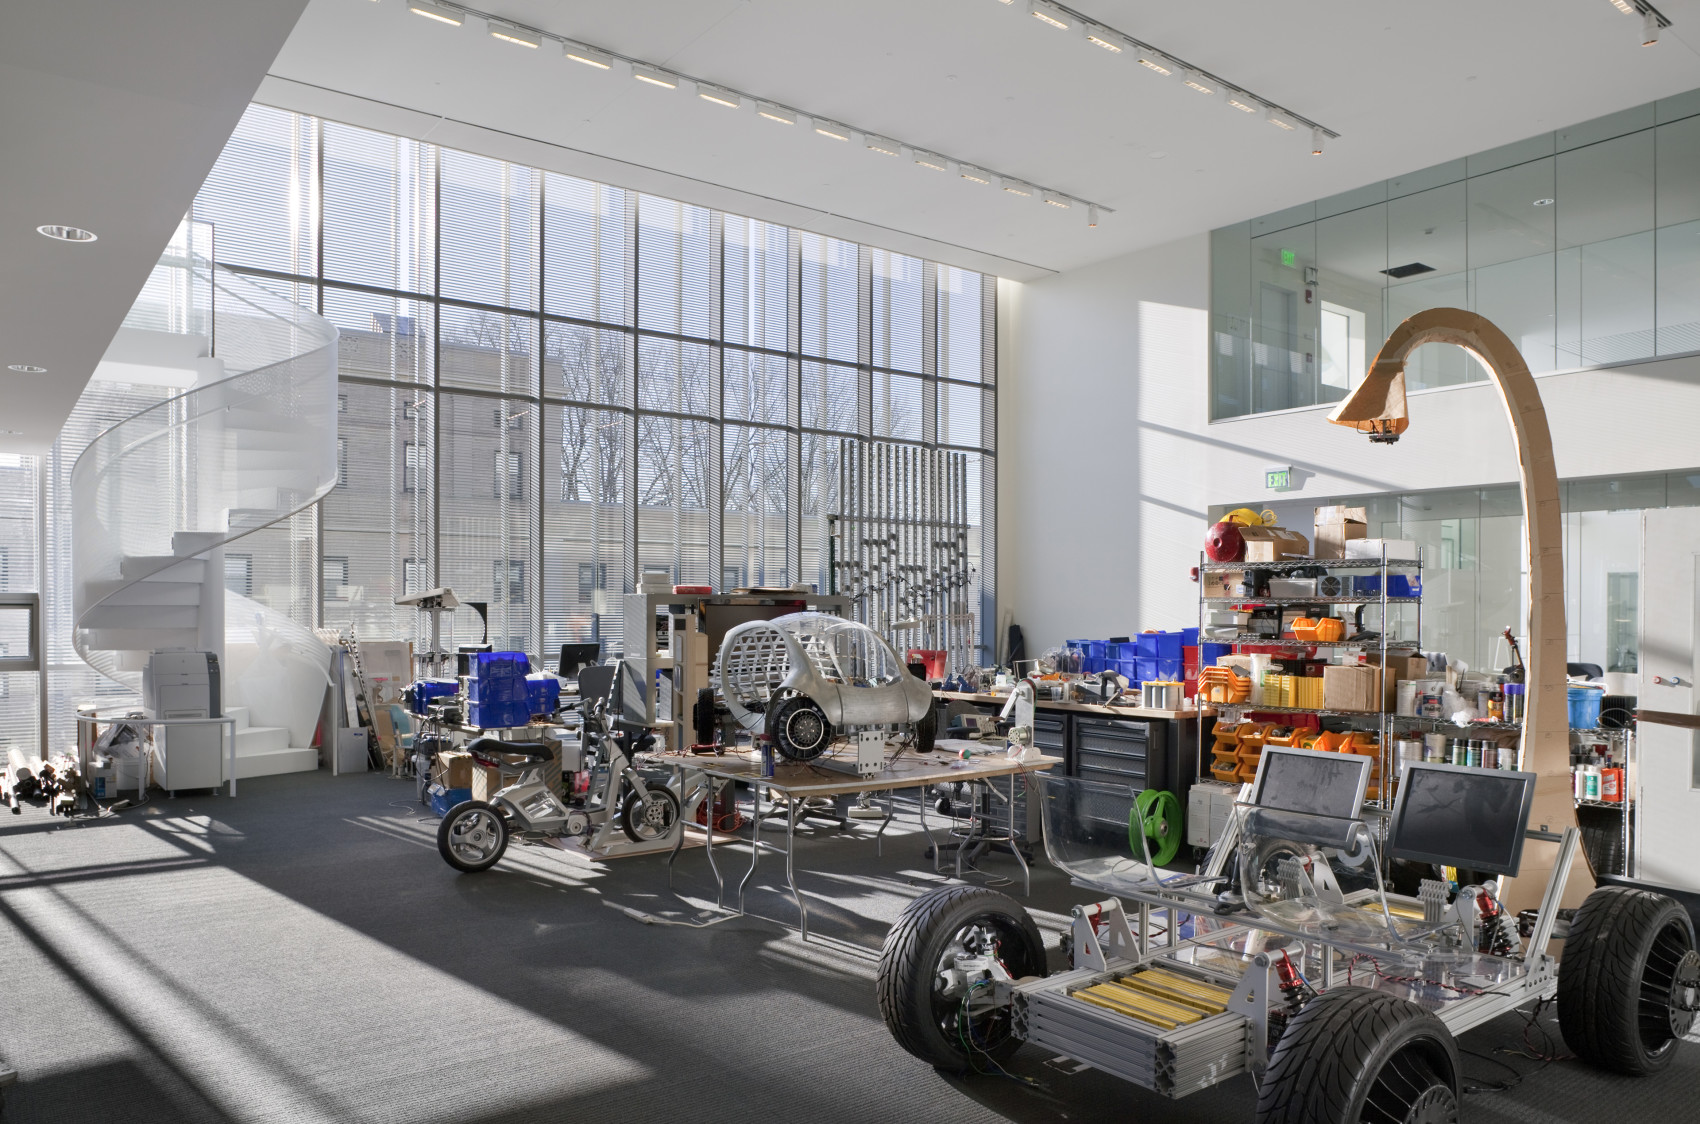 mit media lab research assistant